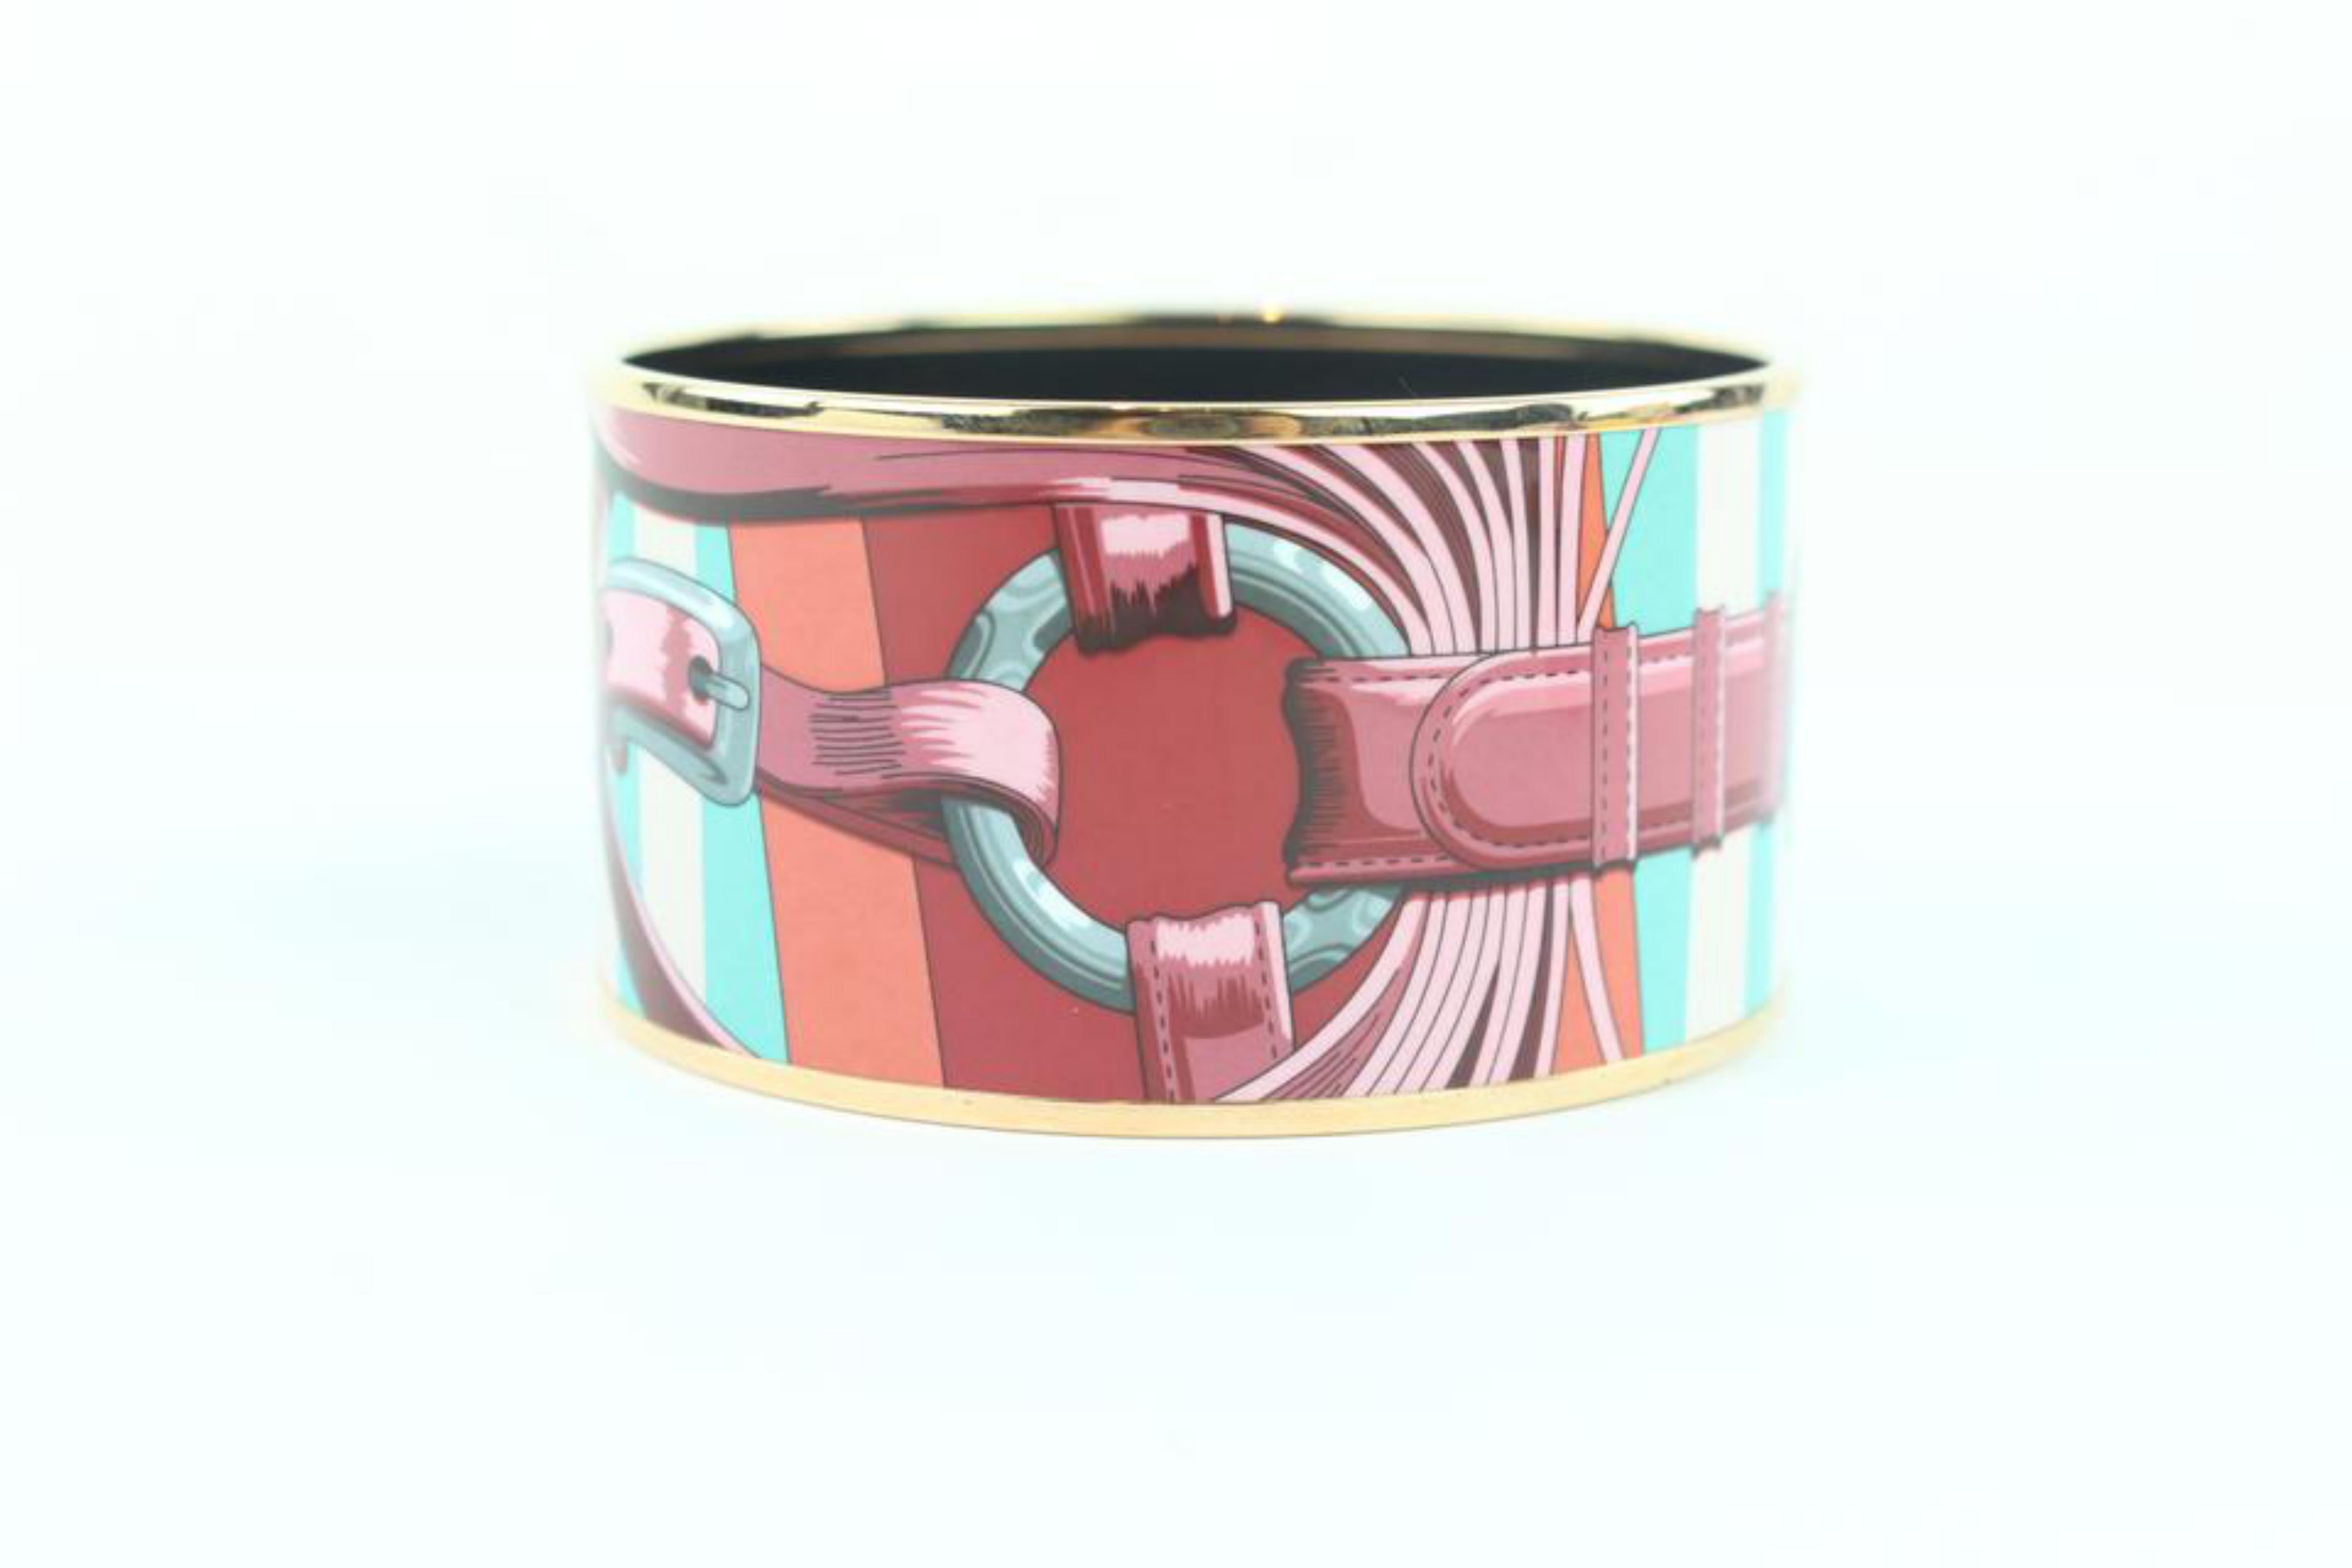 Hermès Multicolor Extra Wide Enamel Bangle 8hz1009 Bracelet In New Condition For Sale In Forest Hills, NY